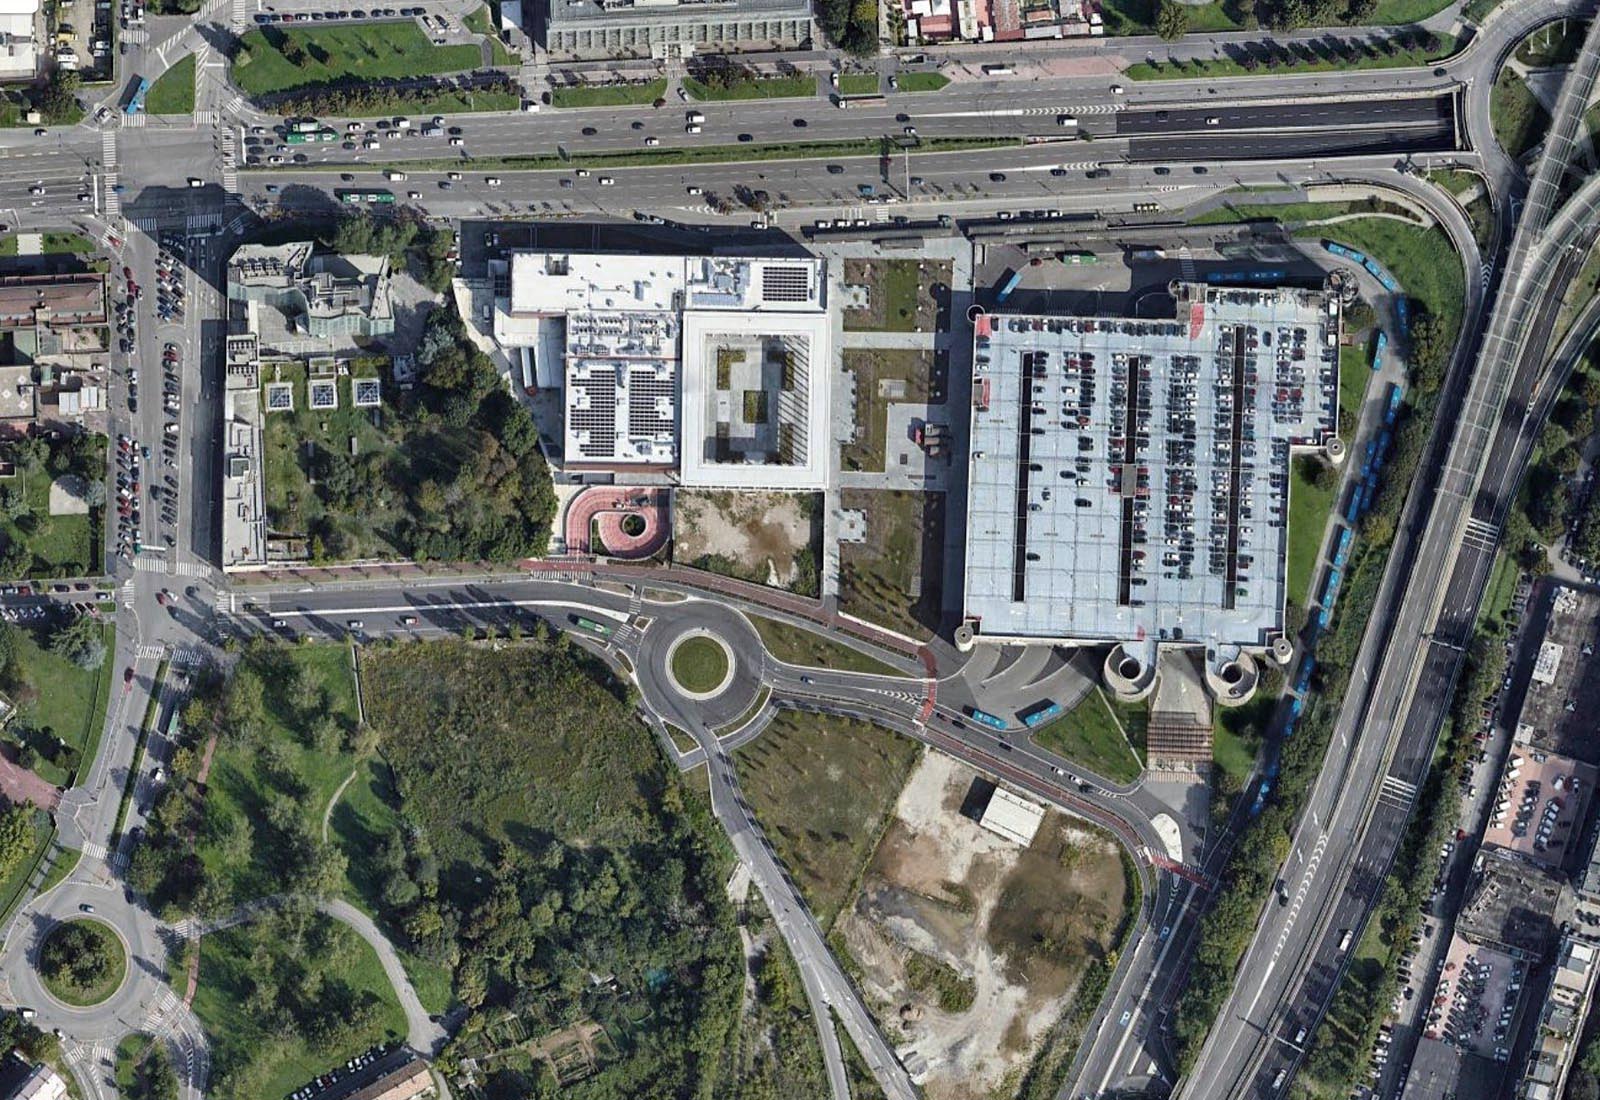 Temporary social house in the Famagosta area in Milan - Zenith aerial view